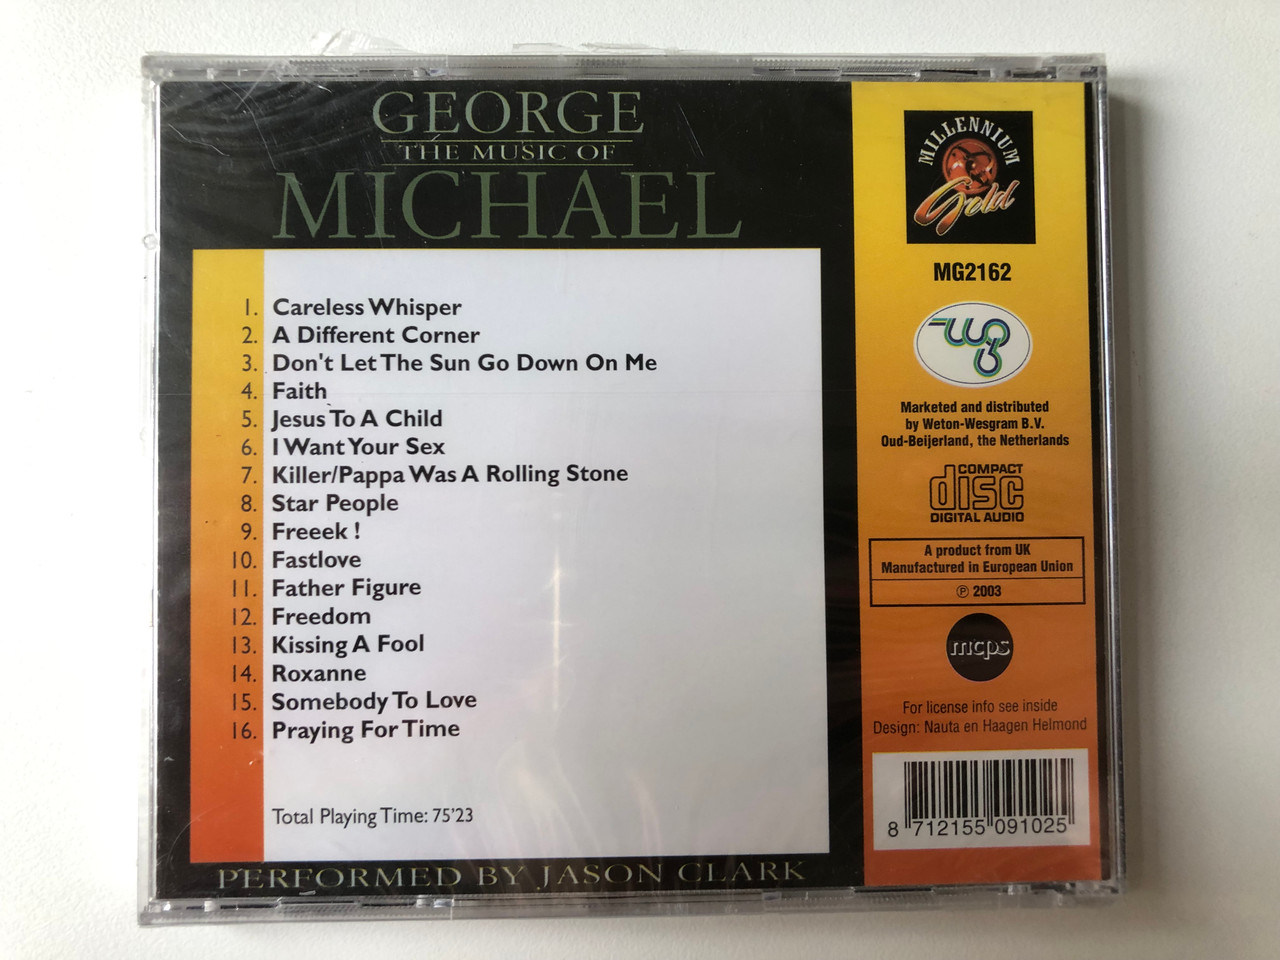 https://cdn10.bigcommerce.com/s-62bdpkt7pb/products/0/images/296701/The_Music_Of_George_Michael_-_Performed_By_Jason_Clark_Careless_Whisper_Dont_Let_The_Sun_Go_Down_On_Me_Father_Figure_I_Want_Your_Sex_Freedom_This_Album_Contains_Cover_Versions_Mille__24146.1693242020.1280.1280.JPG?c=2&_gl=1*1xrv31w*_ga*MjA2NTIxMjE2MC4xNTkwNTEyNTMy*_ga_WS2VZYPC6G*MTY5MzIyNzczNi4xMDQ4LjEuMTY5MzI0MTYxNS4xNy4wLjA.